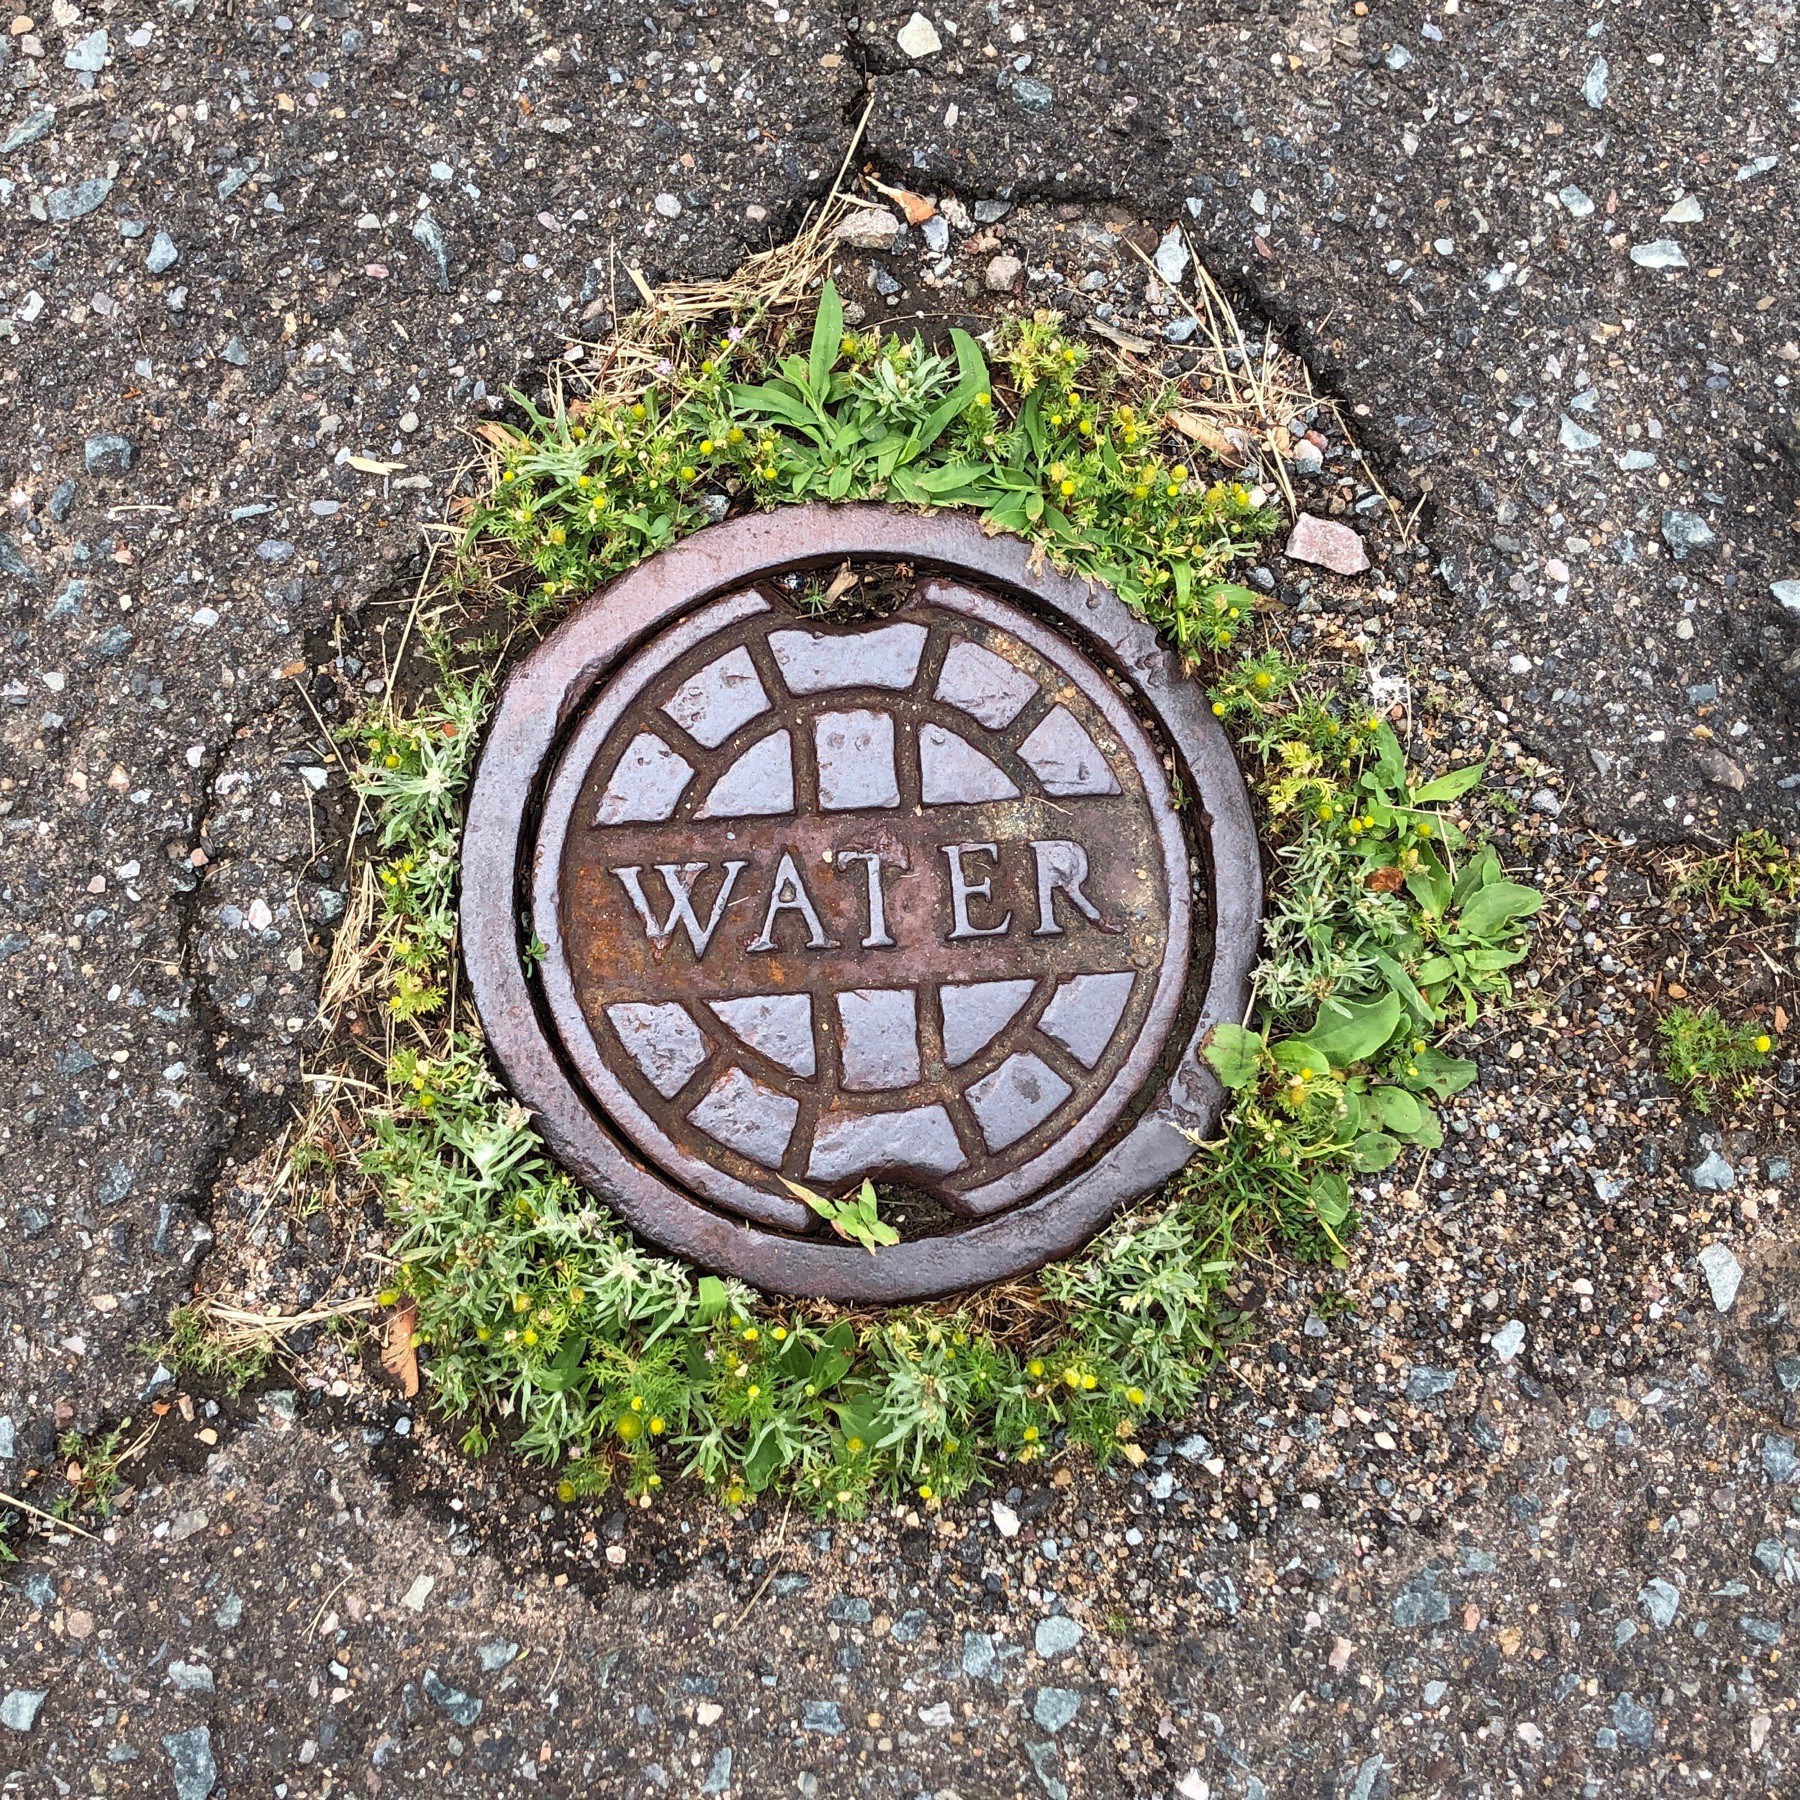 cover on street for water valve.